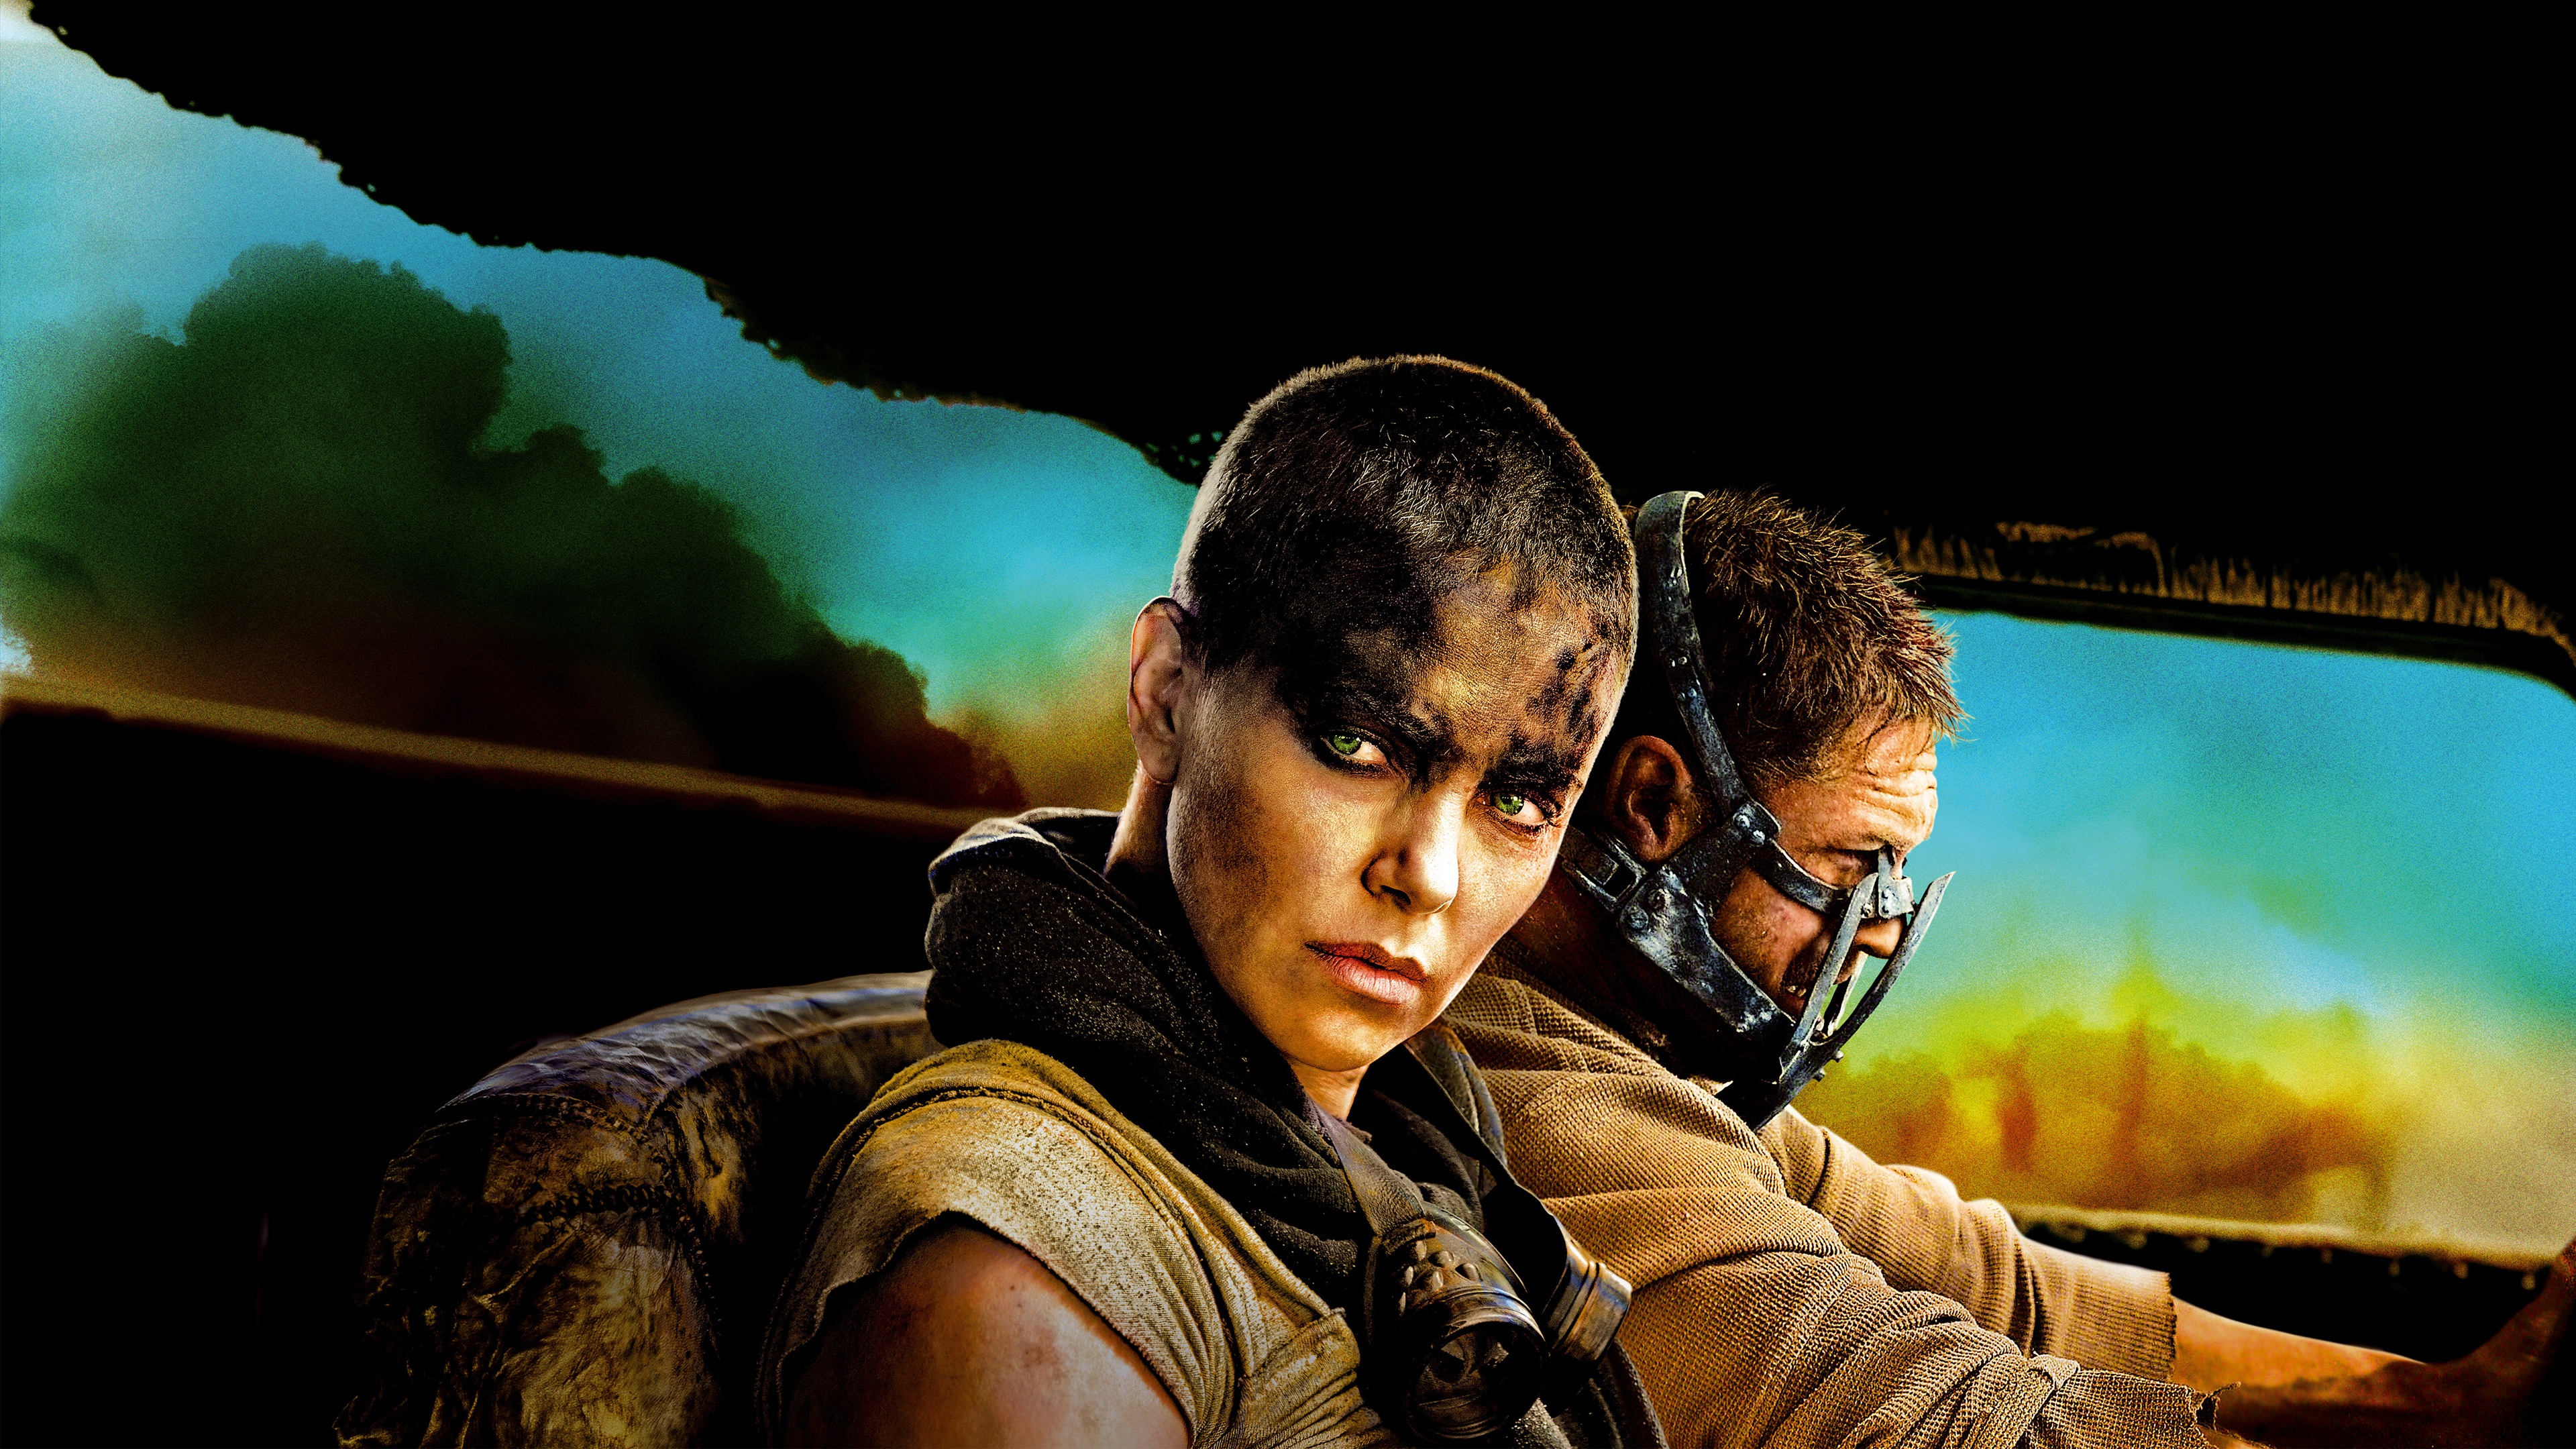 Charlize Theron Mad Max Fury Road Wallpapers HD Wallpapers